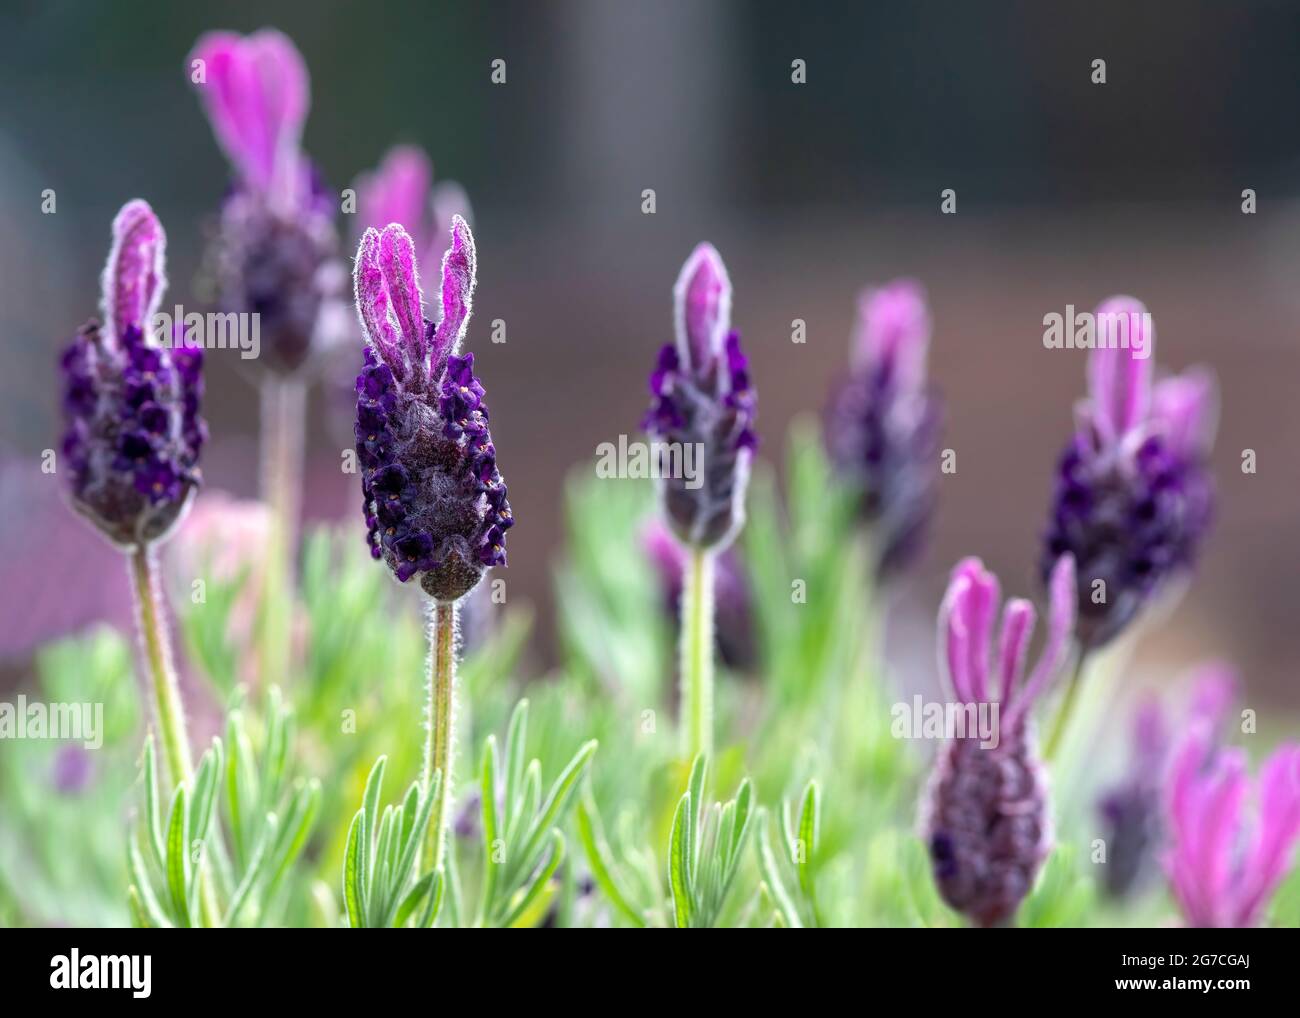 Lavandula stoechas, selective focus on a single lavender flower with other flowers in the background, botany backdrop shot for copy space Stock Photo